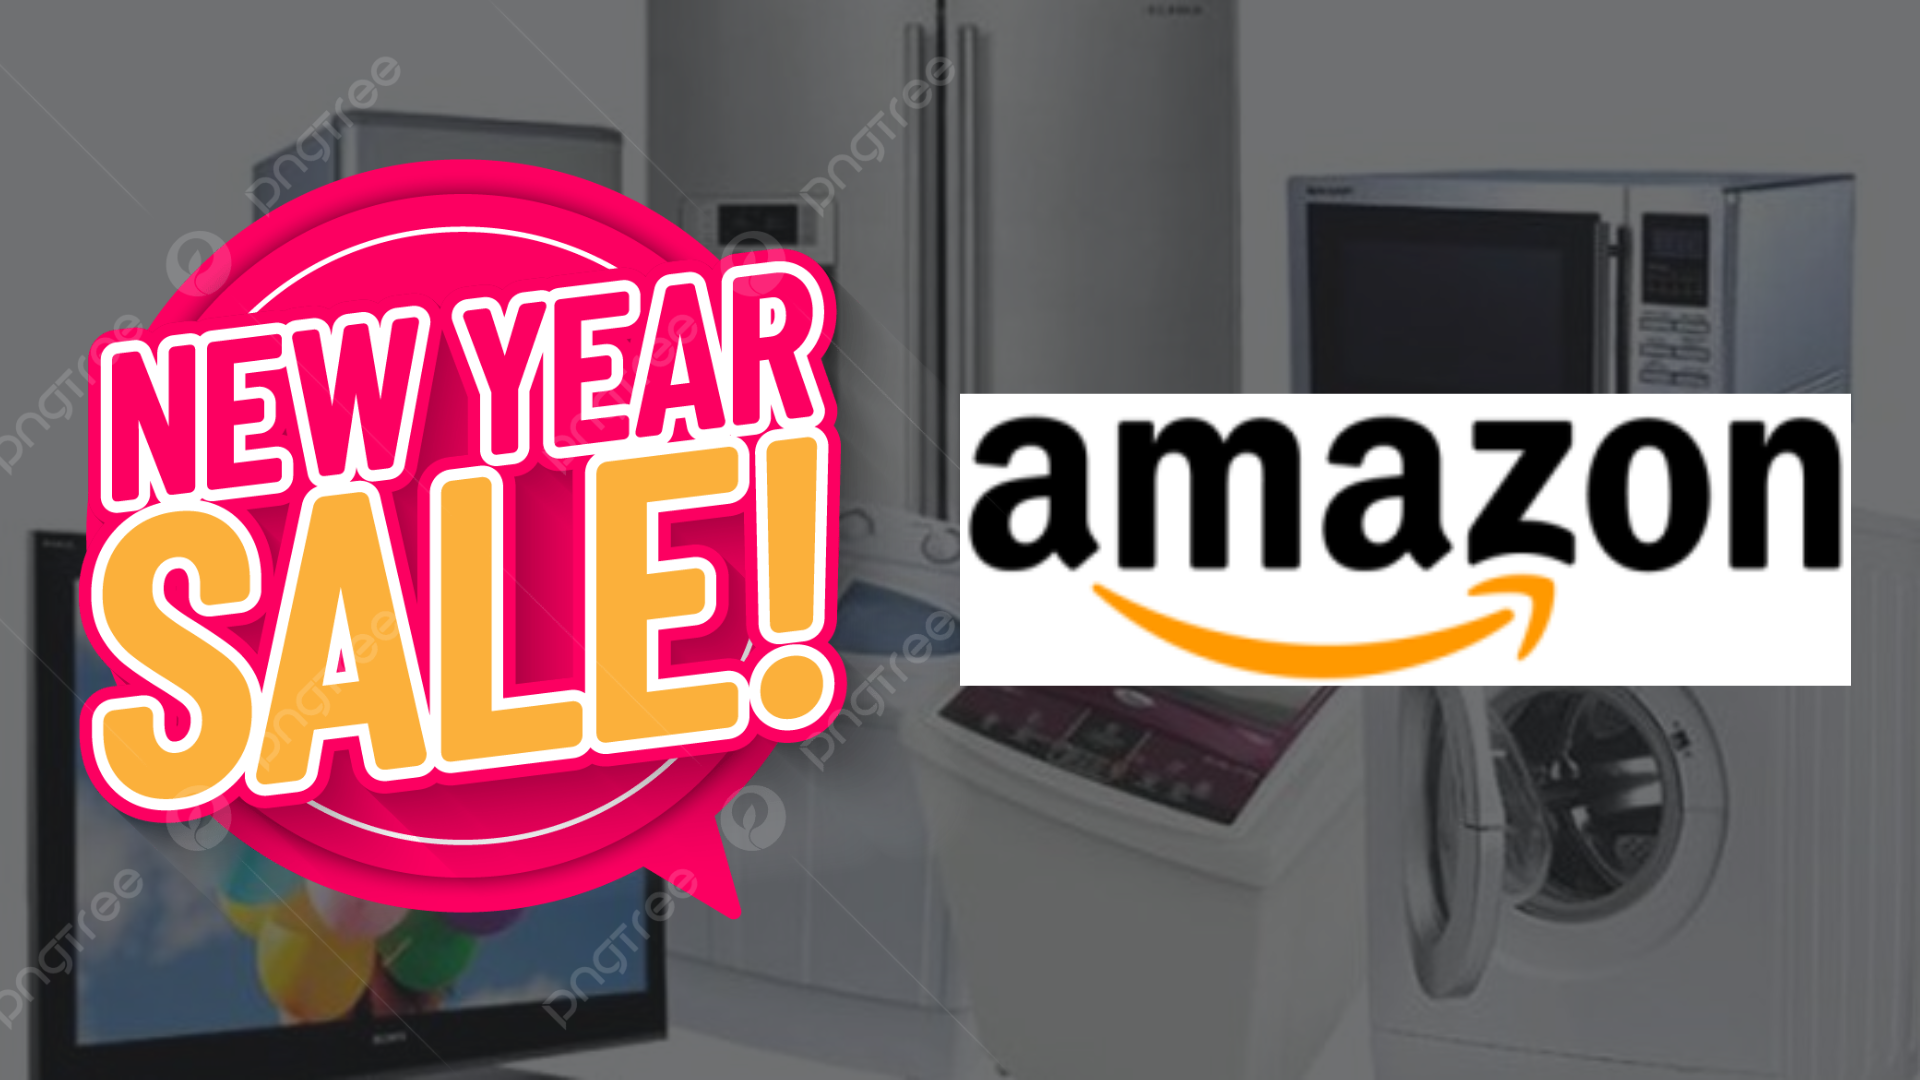 Top 11 Amazon New Year Offers on Electronics in 2023